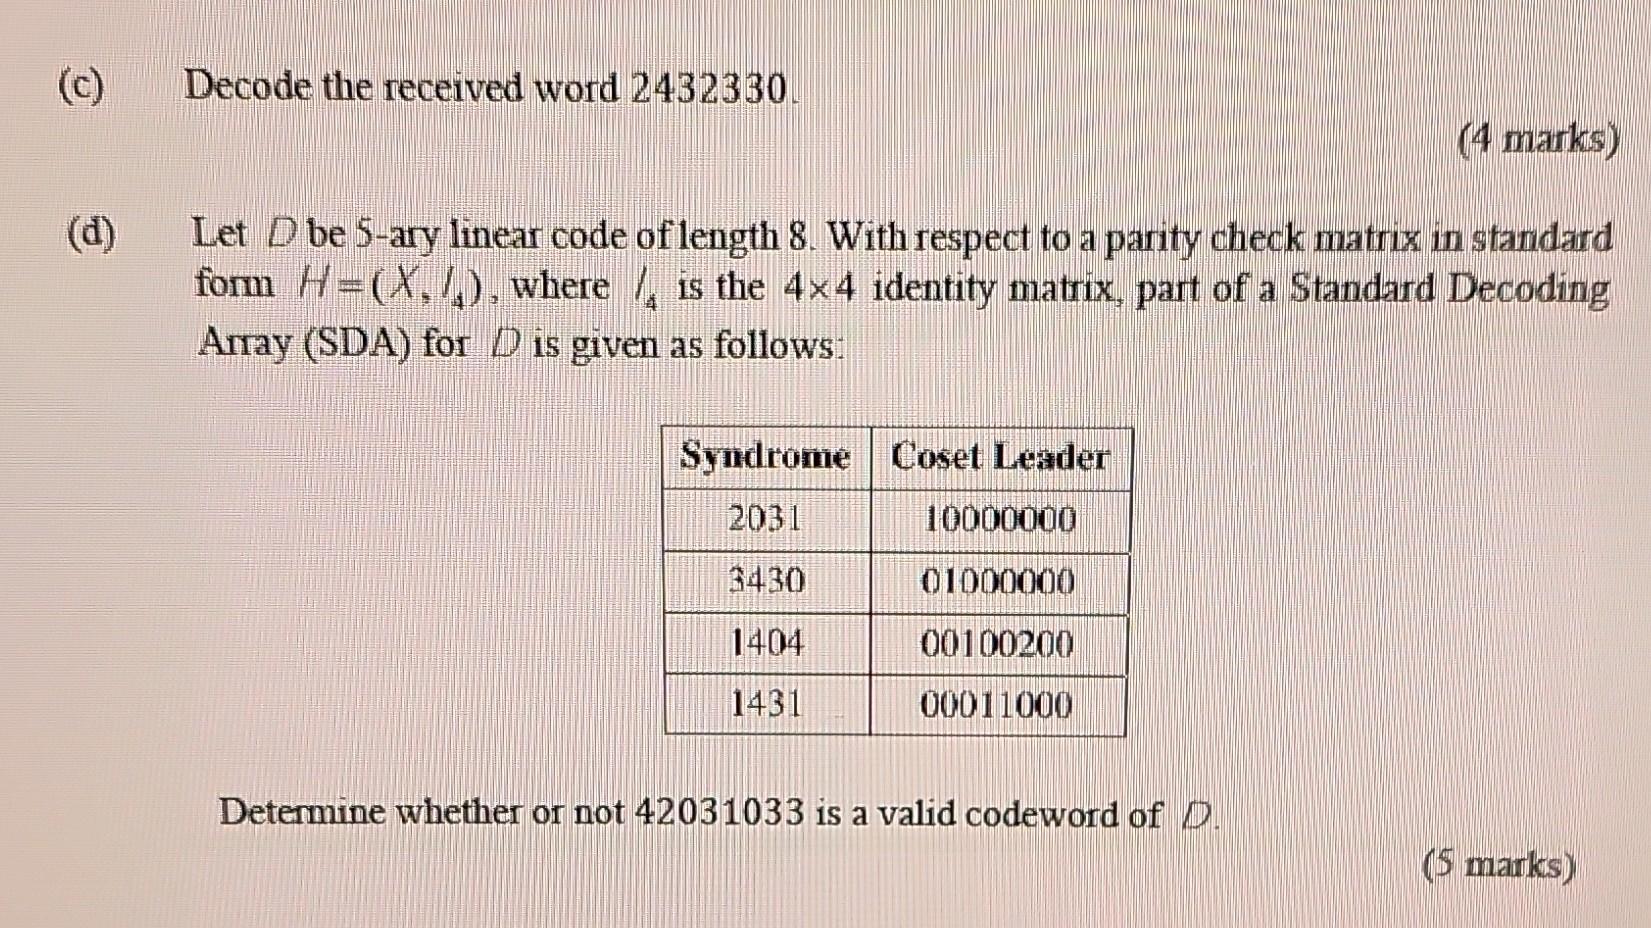 (c) (d) Decode the received word 2432330. Let D be 5-ary linear code of length 8. With respect to a parity